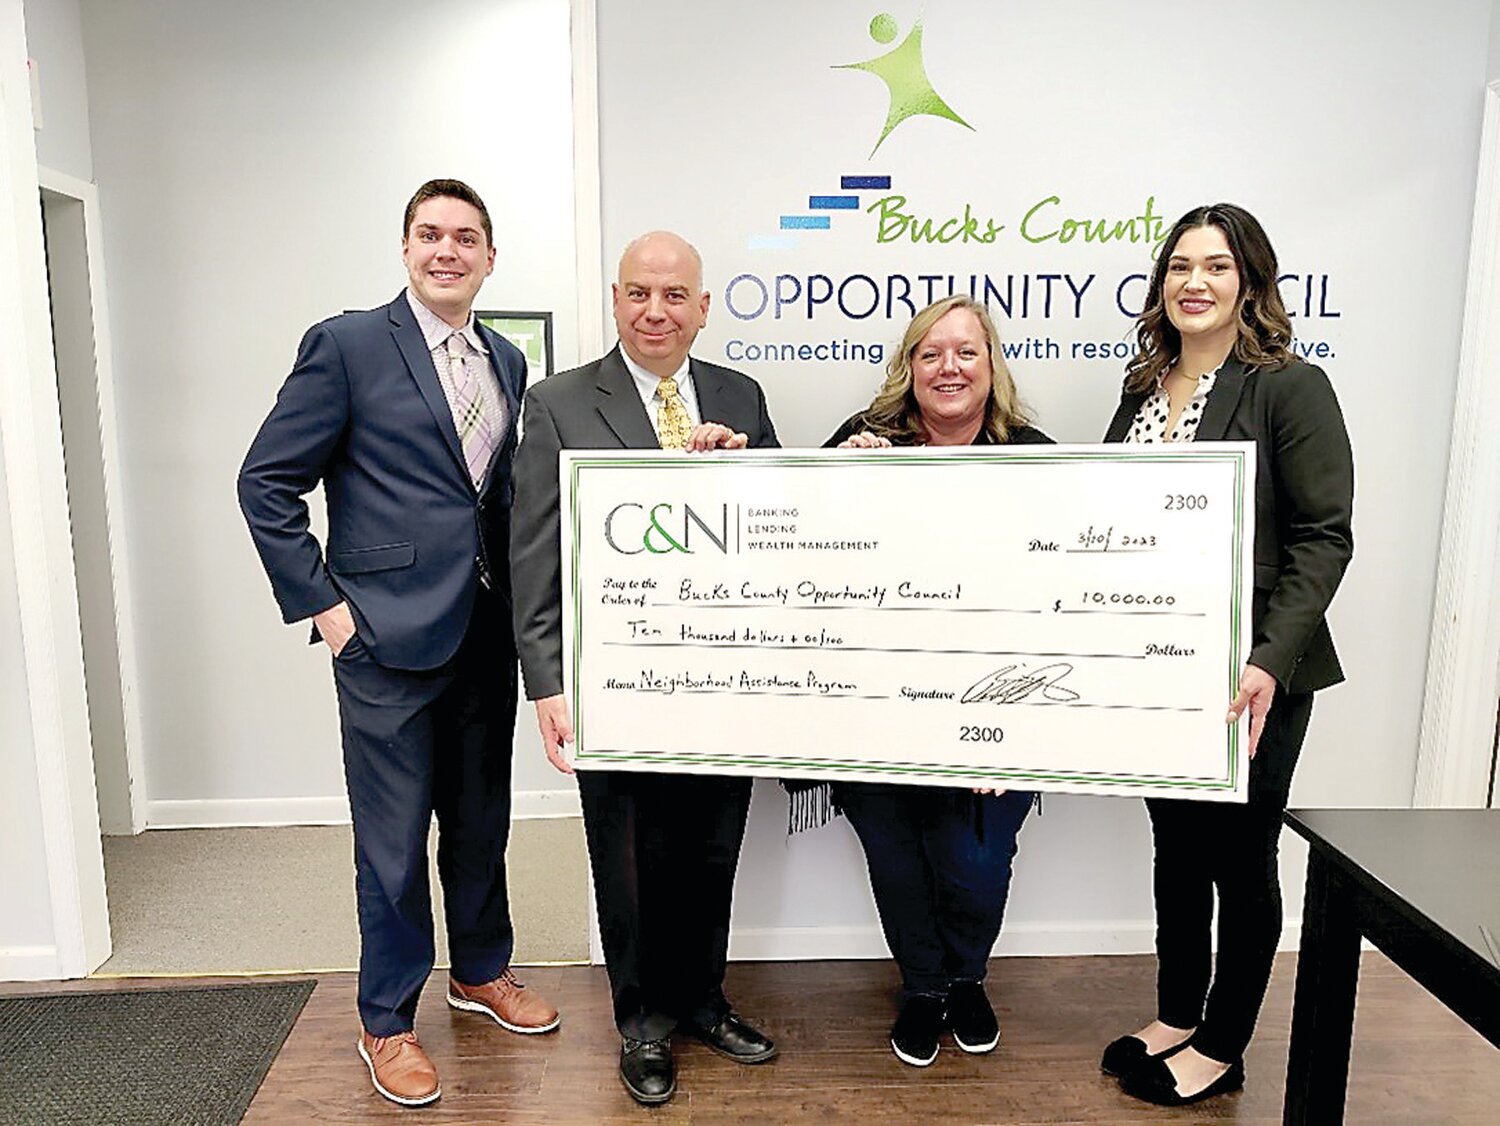 From left are M. William Kadri, VP/regional personal banking manager, C&N; Joseph Cuozzo, director of development, Bucks County Opportunity Council; Erin Lukoss, CEO/executive director, Bucks County Opportunity Council; Alayna Lopez, business banking specialist, C&N.